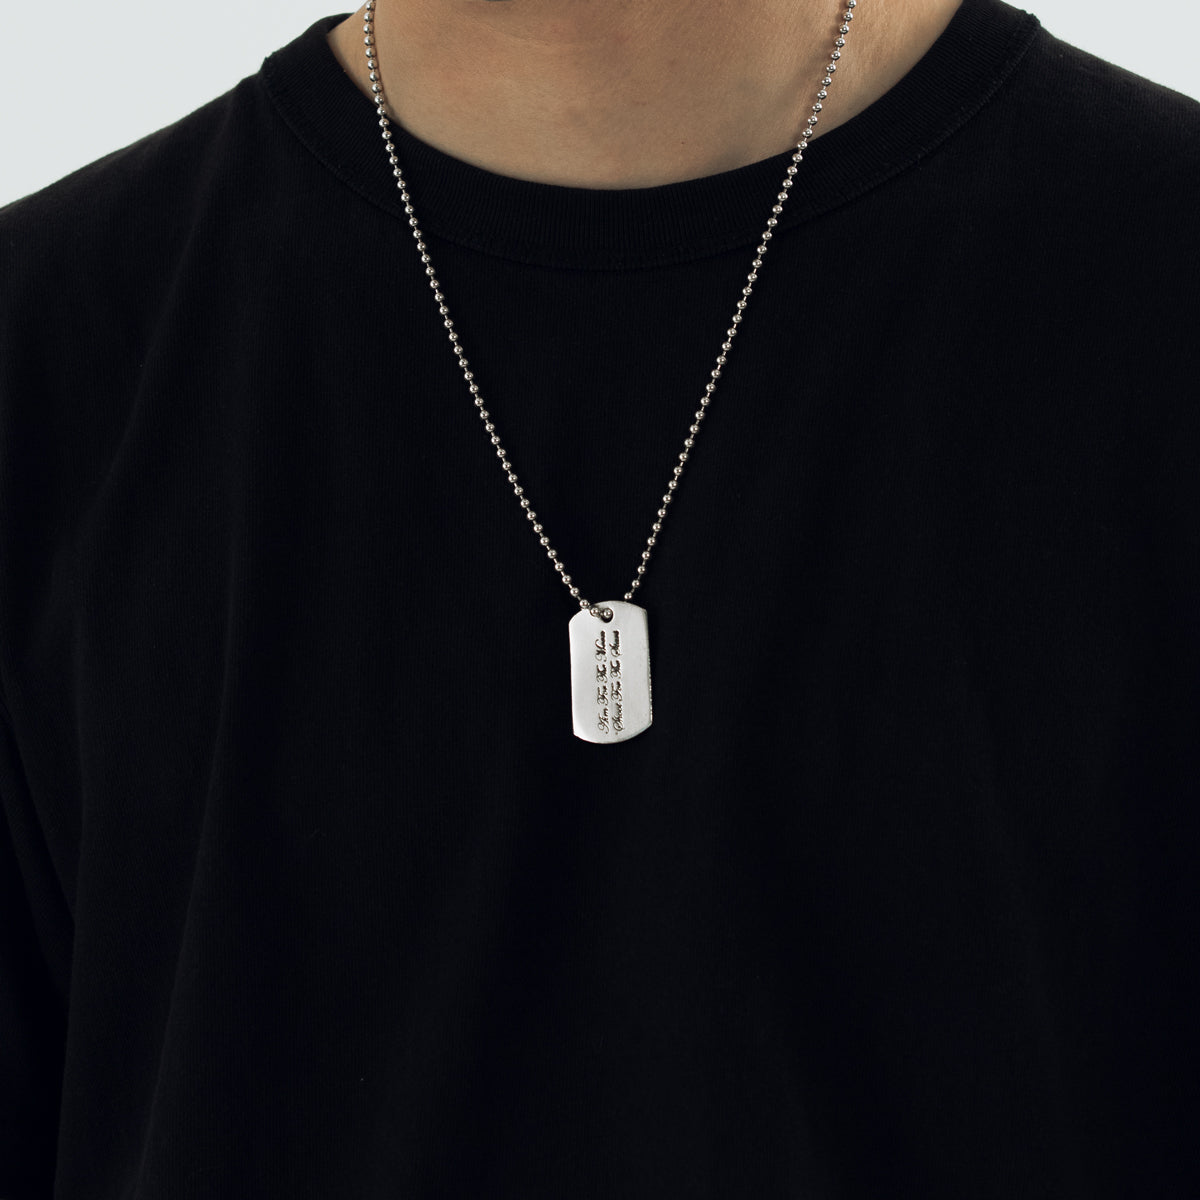 Twojeys Mission necklace